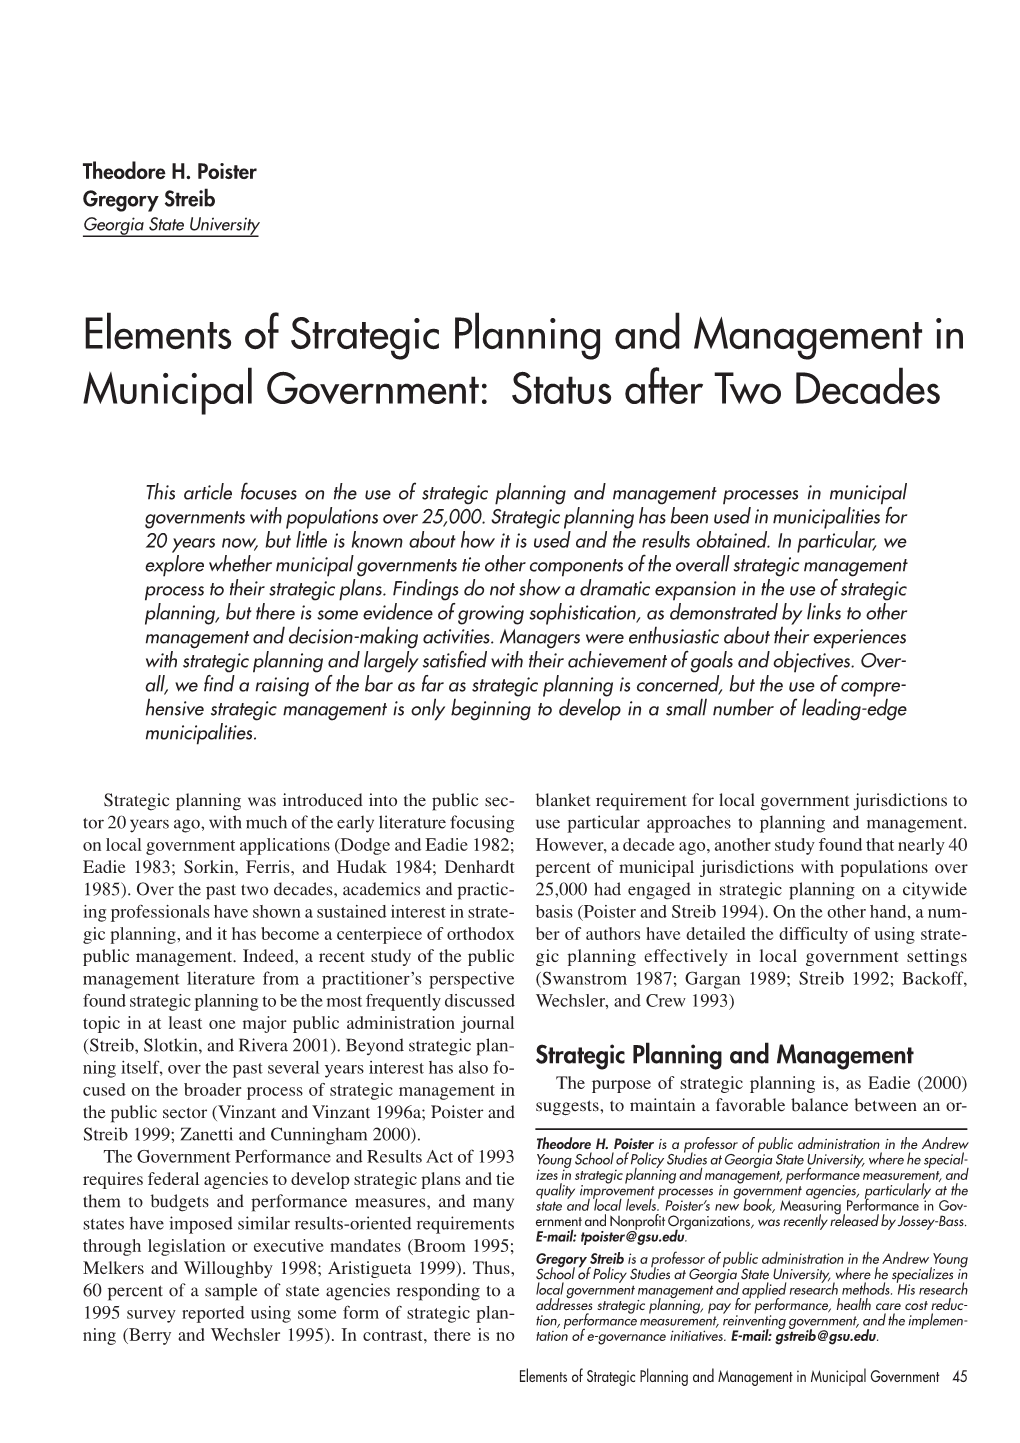 Elements of Strategic Planning and Management in Municipal Government: Status After Two Decades